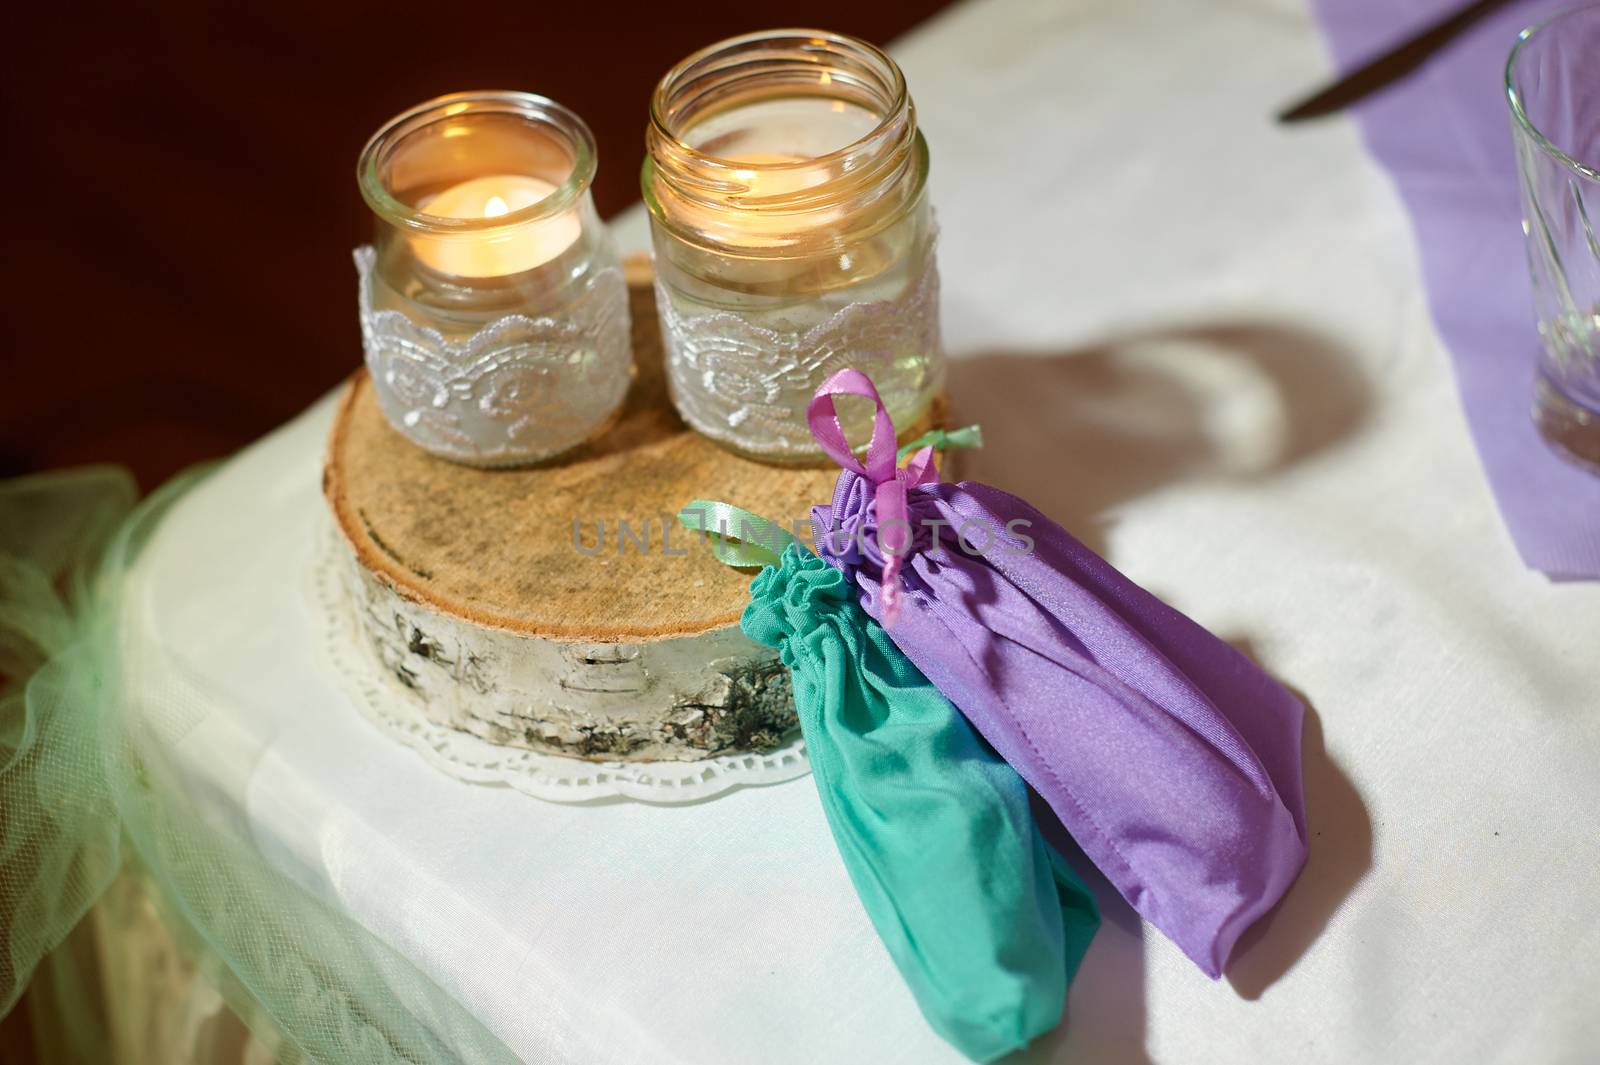 Wedding decoration of the candles on the table in a rustic style.